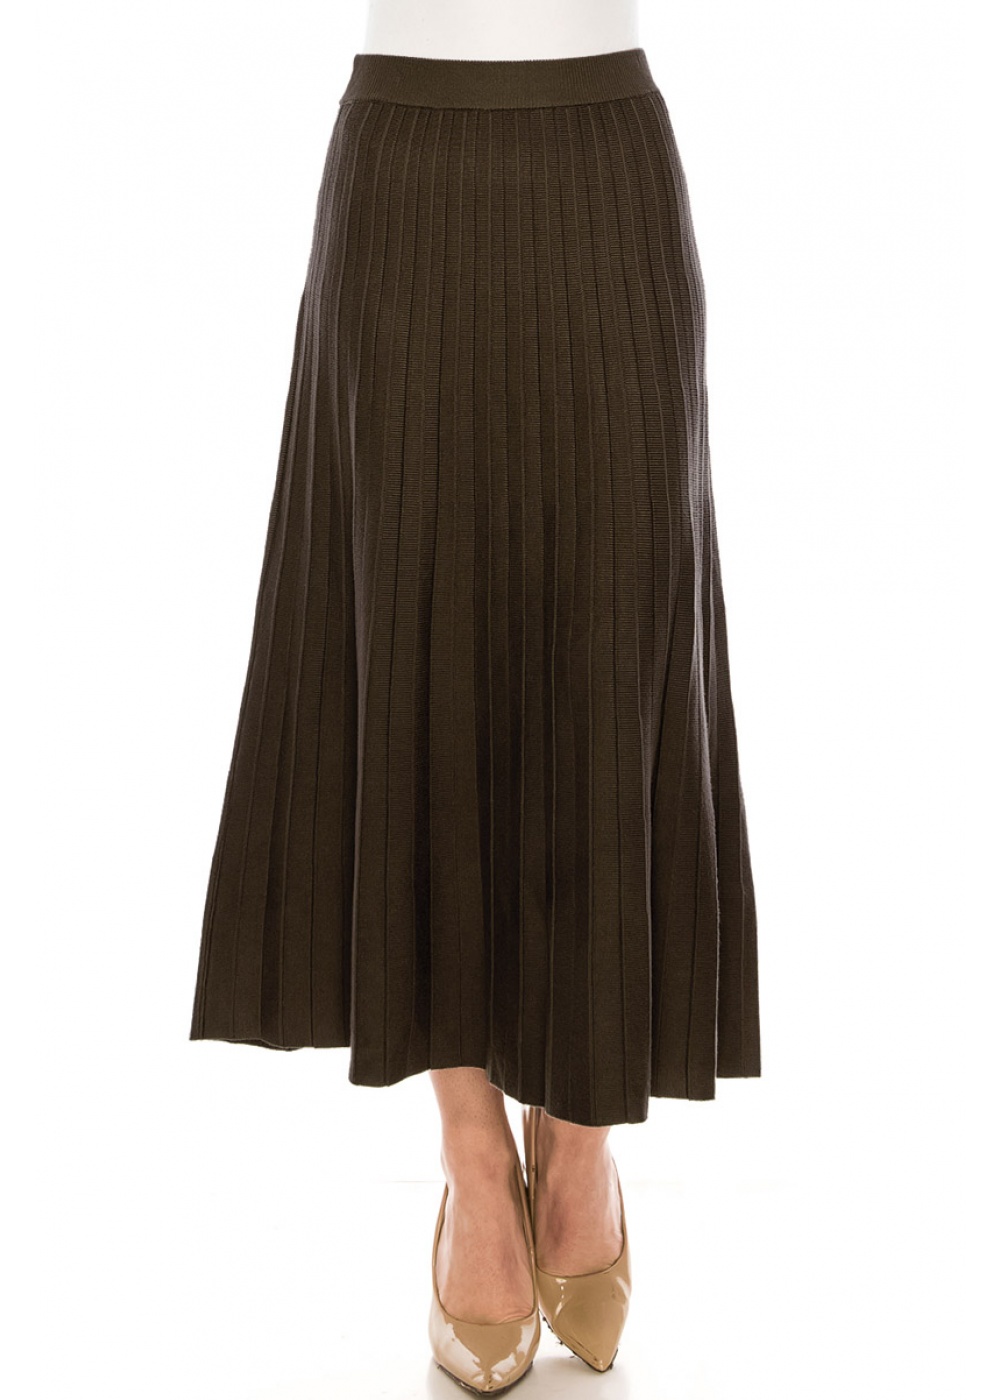 High-waist pleated skirt in olive